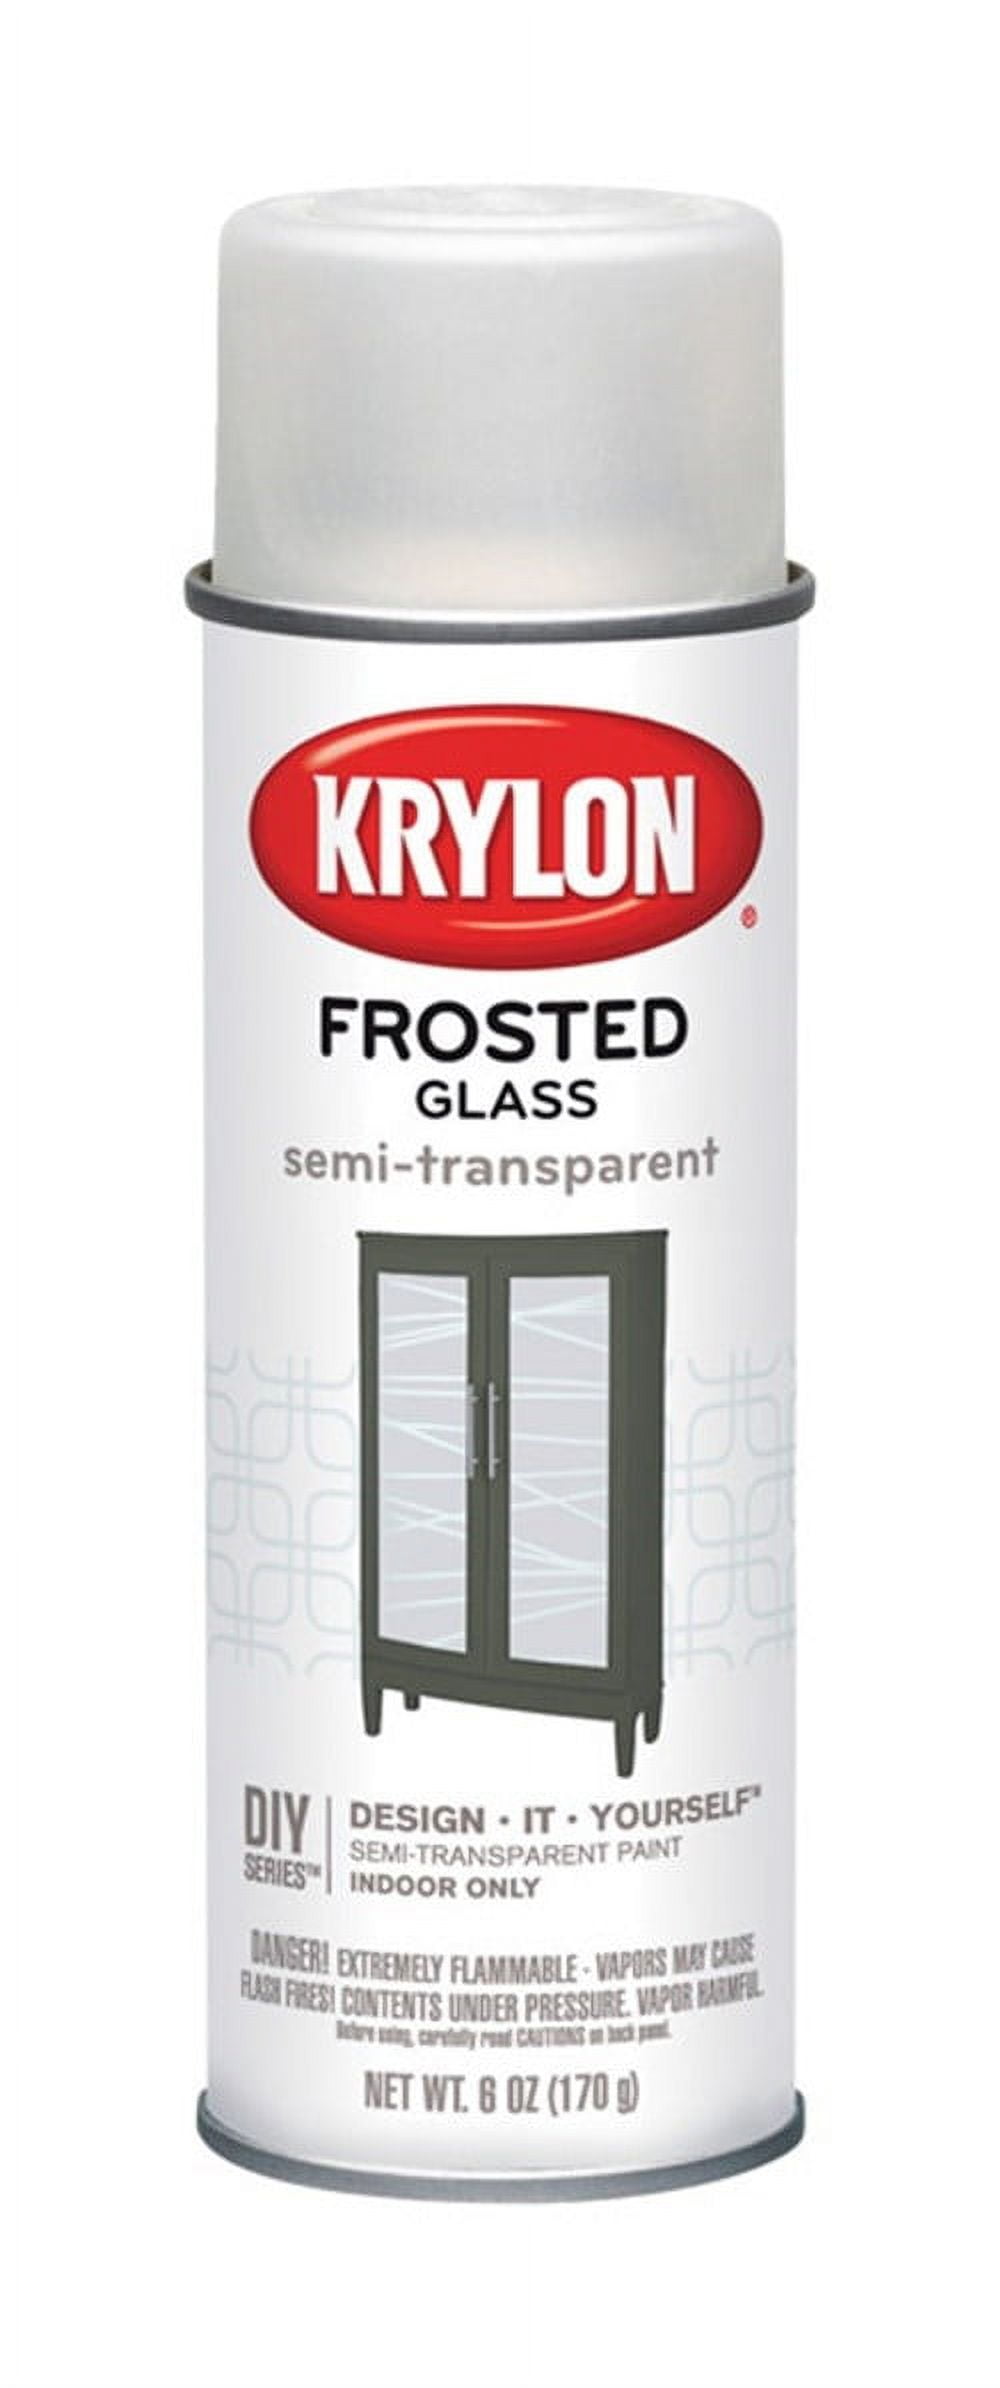 Wqqzjj Office Supplies Frosted Glass Effect Spray Paint, Perfect for Adding Privacy or Creating A Decorative Look on Interior Windows, Mirrors, Shower